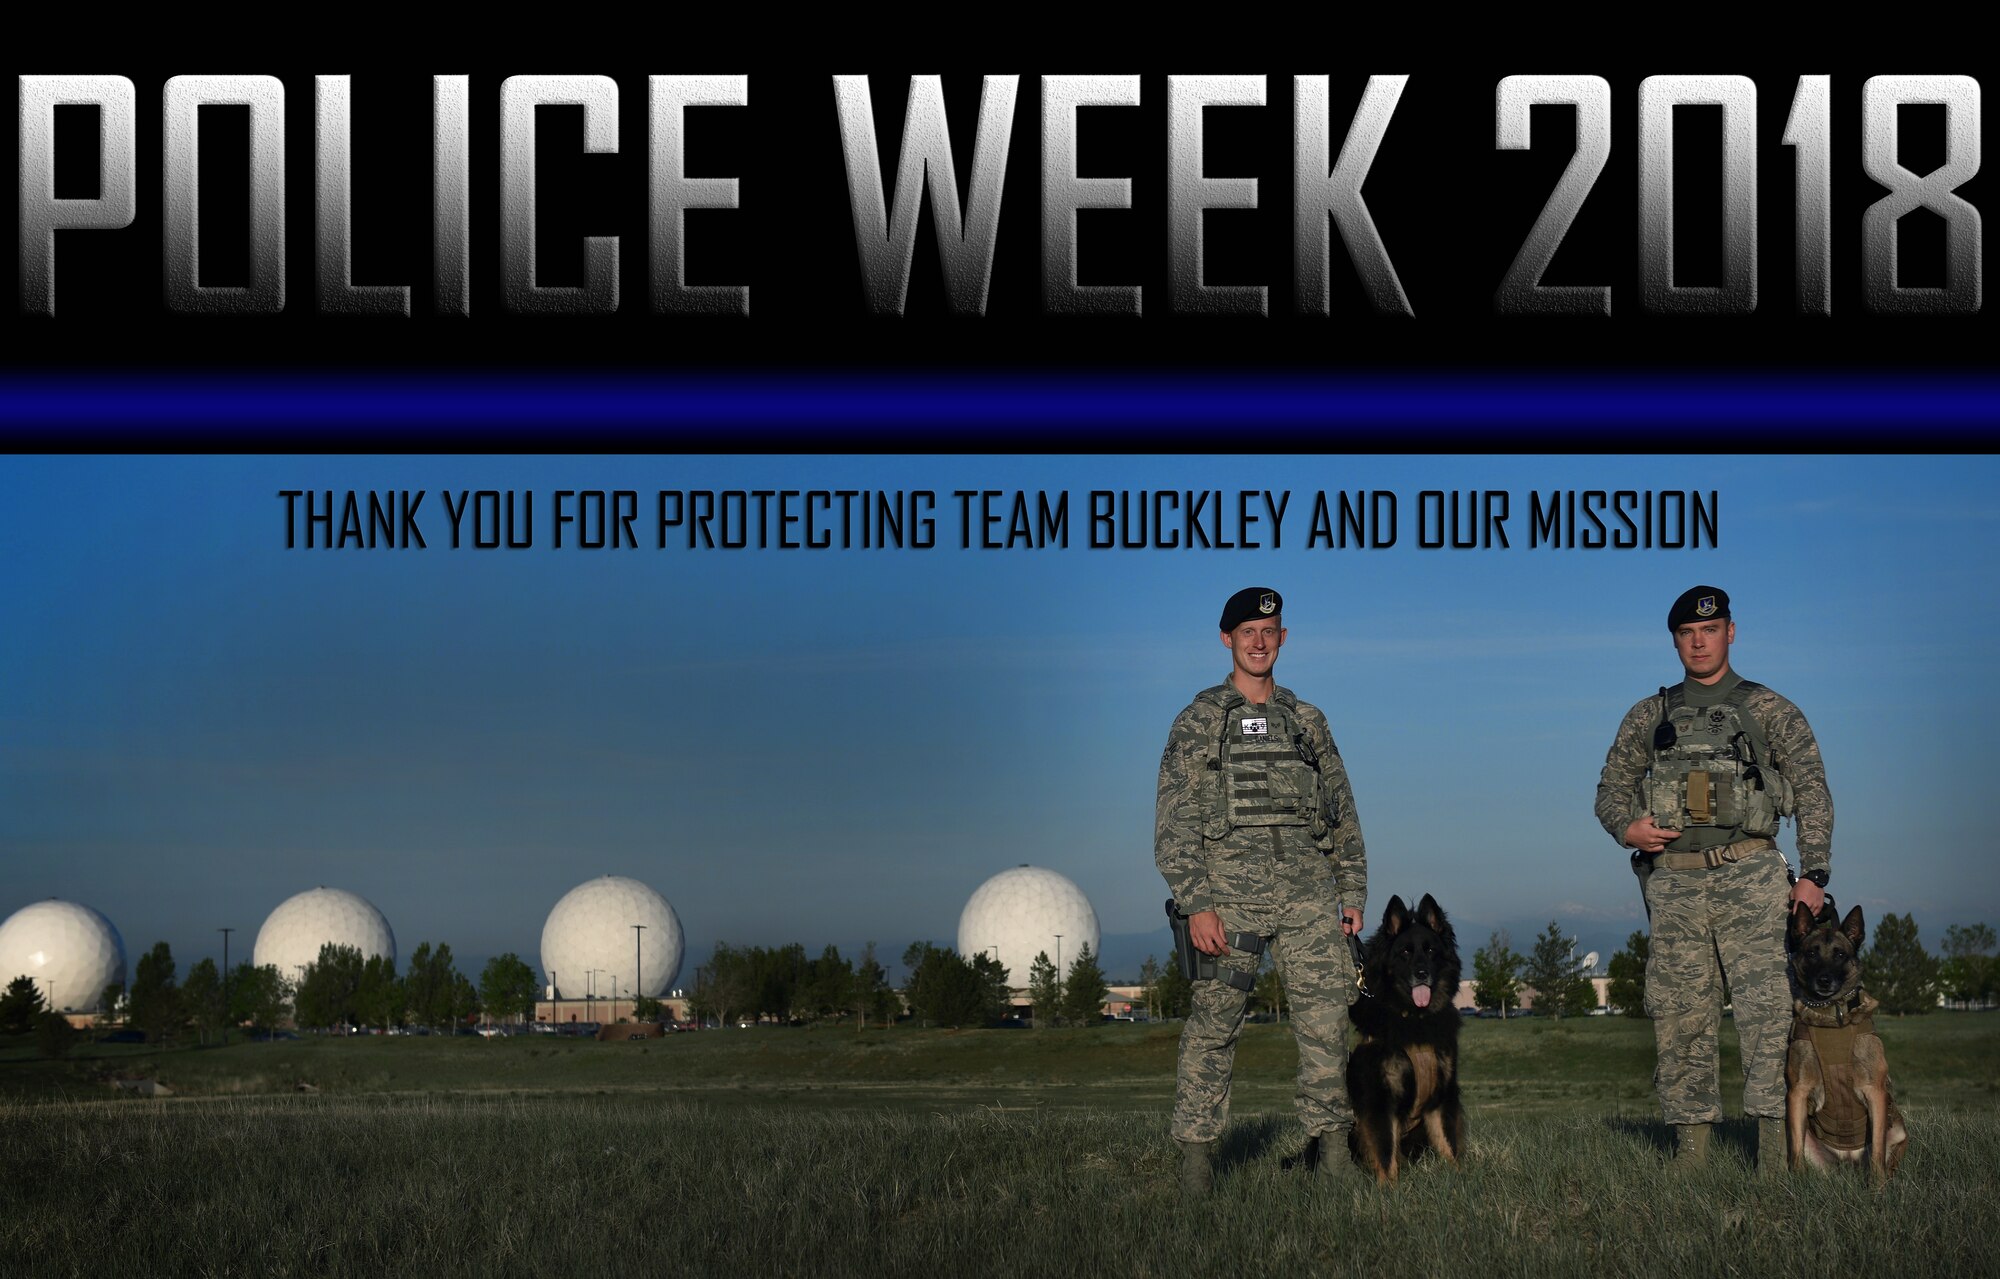 From left to right, Senior Airman Victor Daniels and Staff Sgt. Adam Robinson, both military working dog handlers assigned to the 460th Security Forces Squadron, pose for a photo with their military working dogs, Aries and Ari, respectively, in front of the radomes on Buckley Air Force Base, Colo., May 11, 2018.